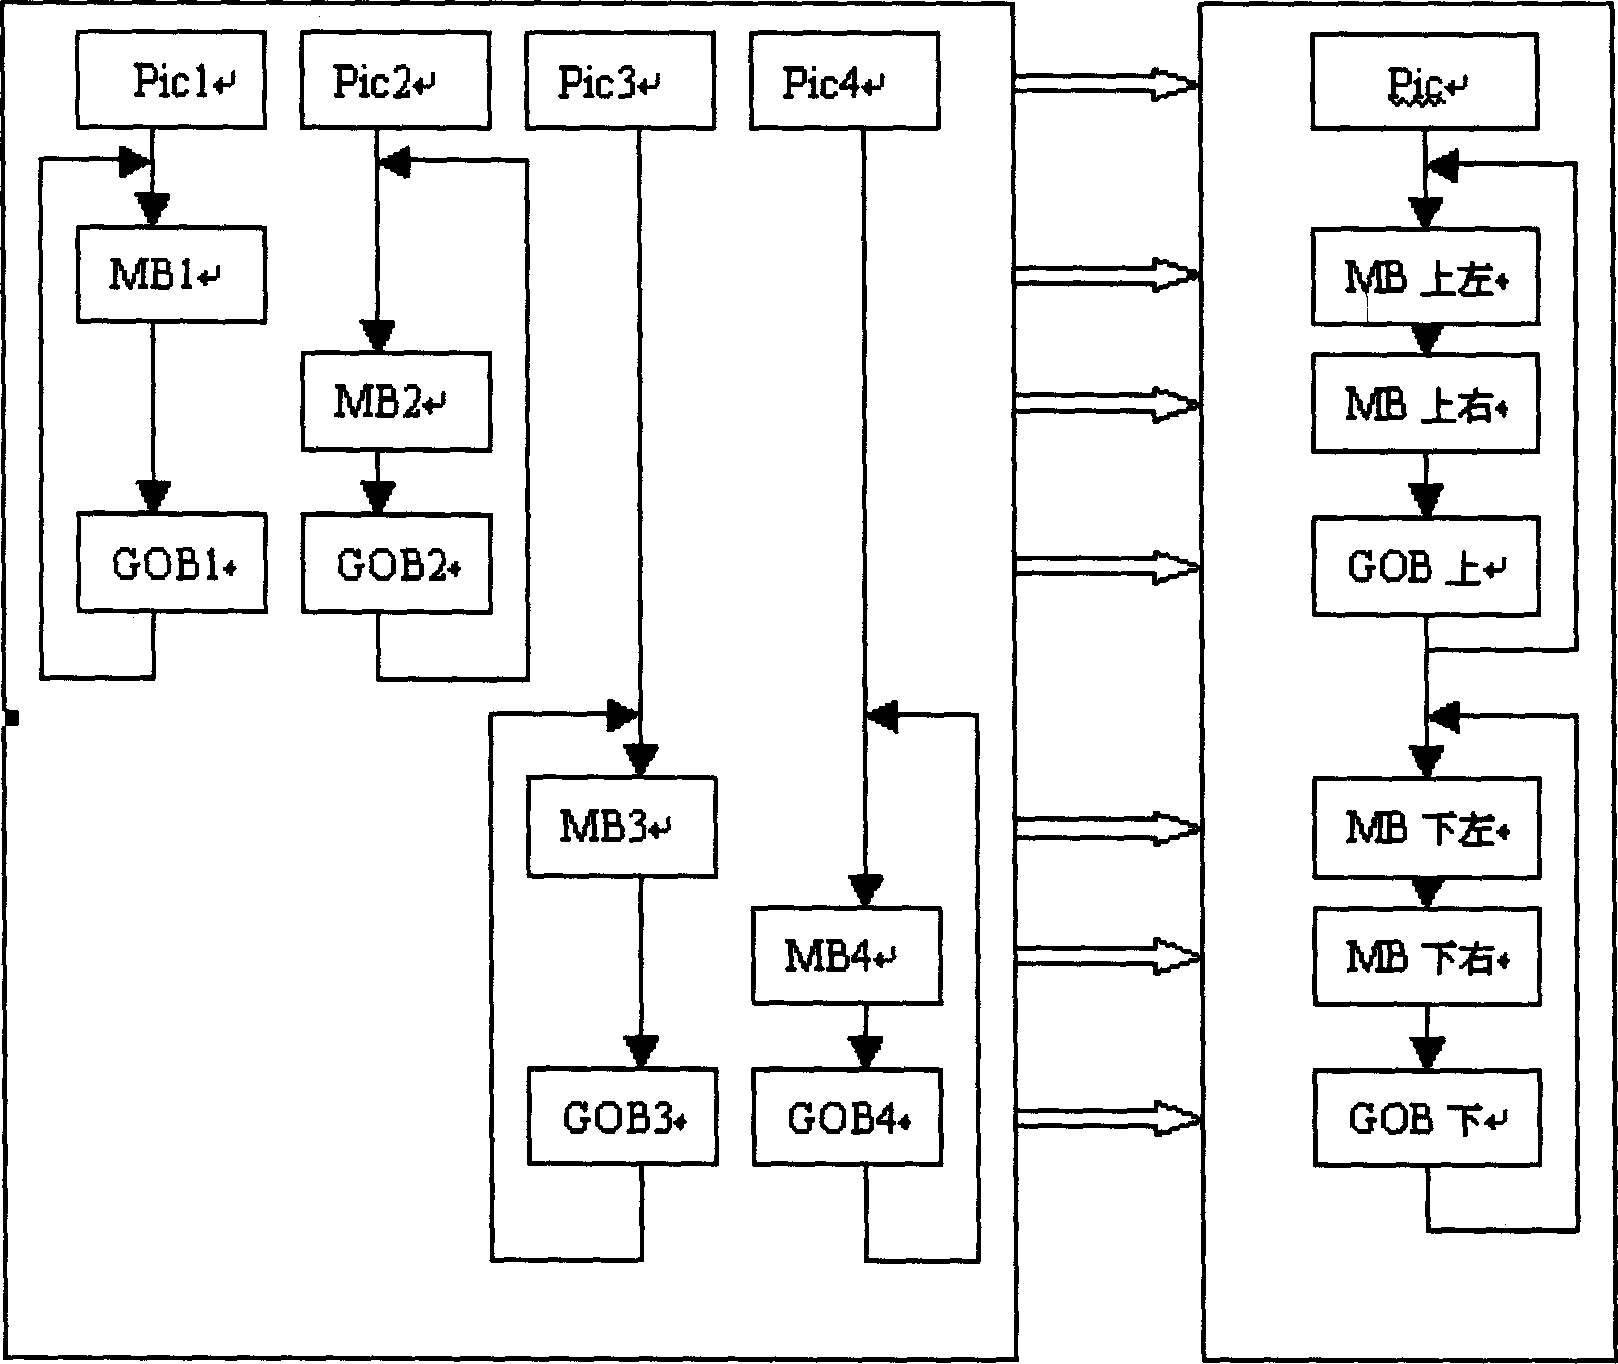 Multi-path picture mixing method based on DTC space